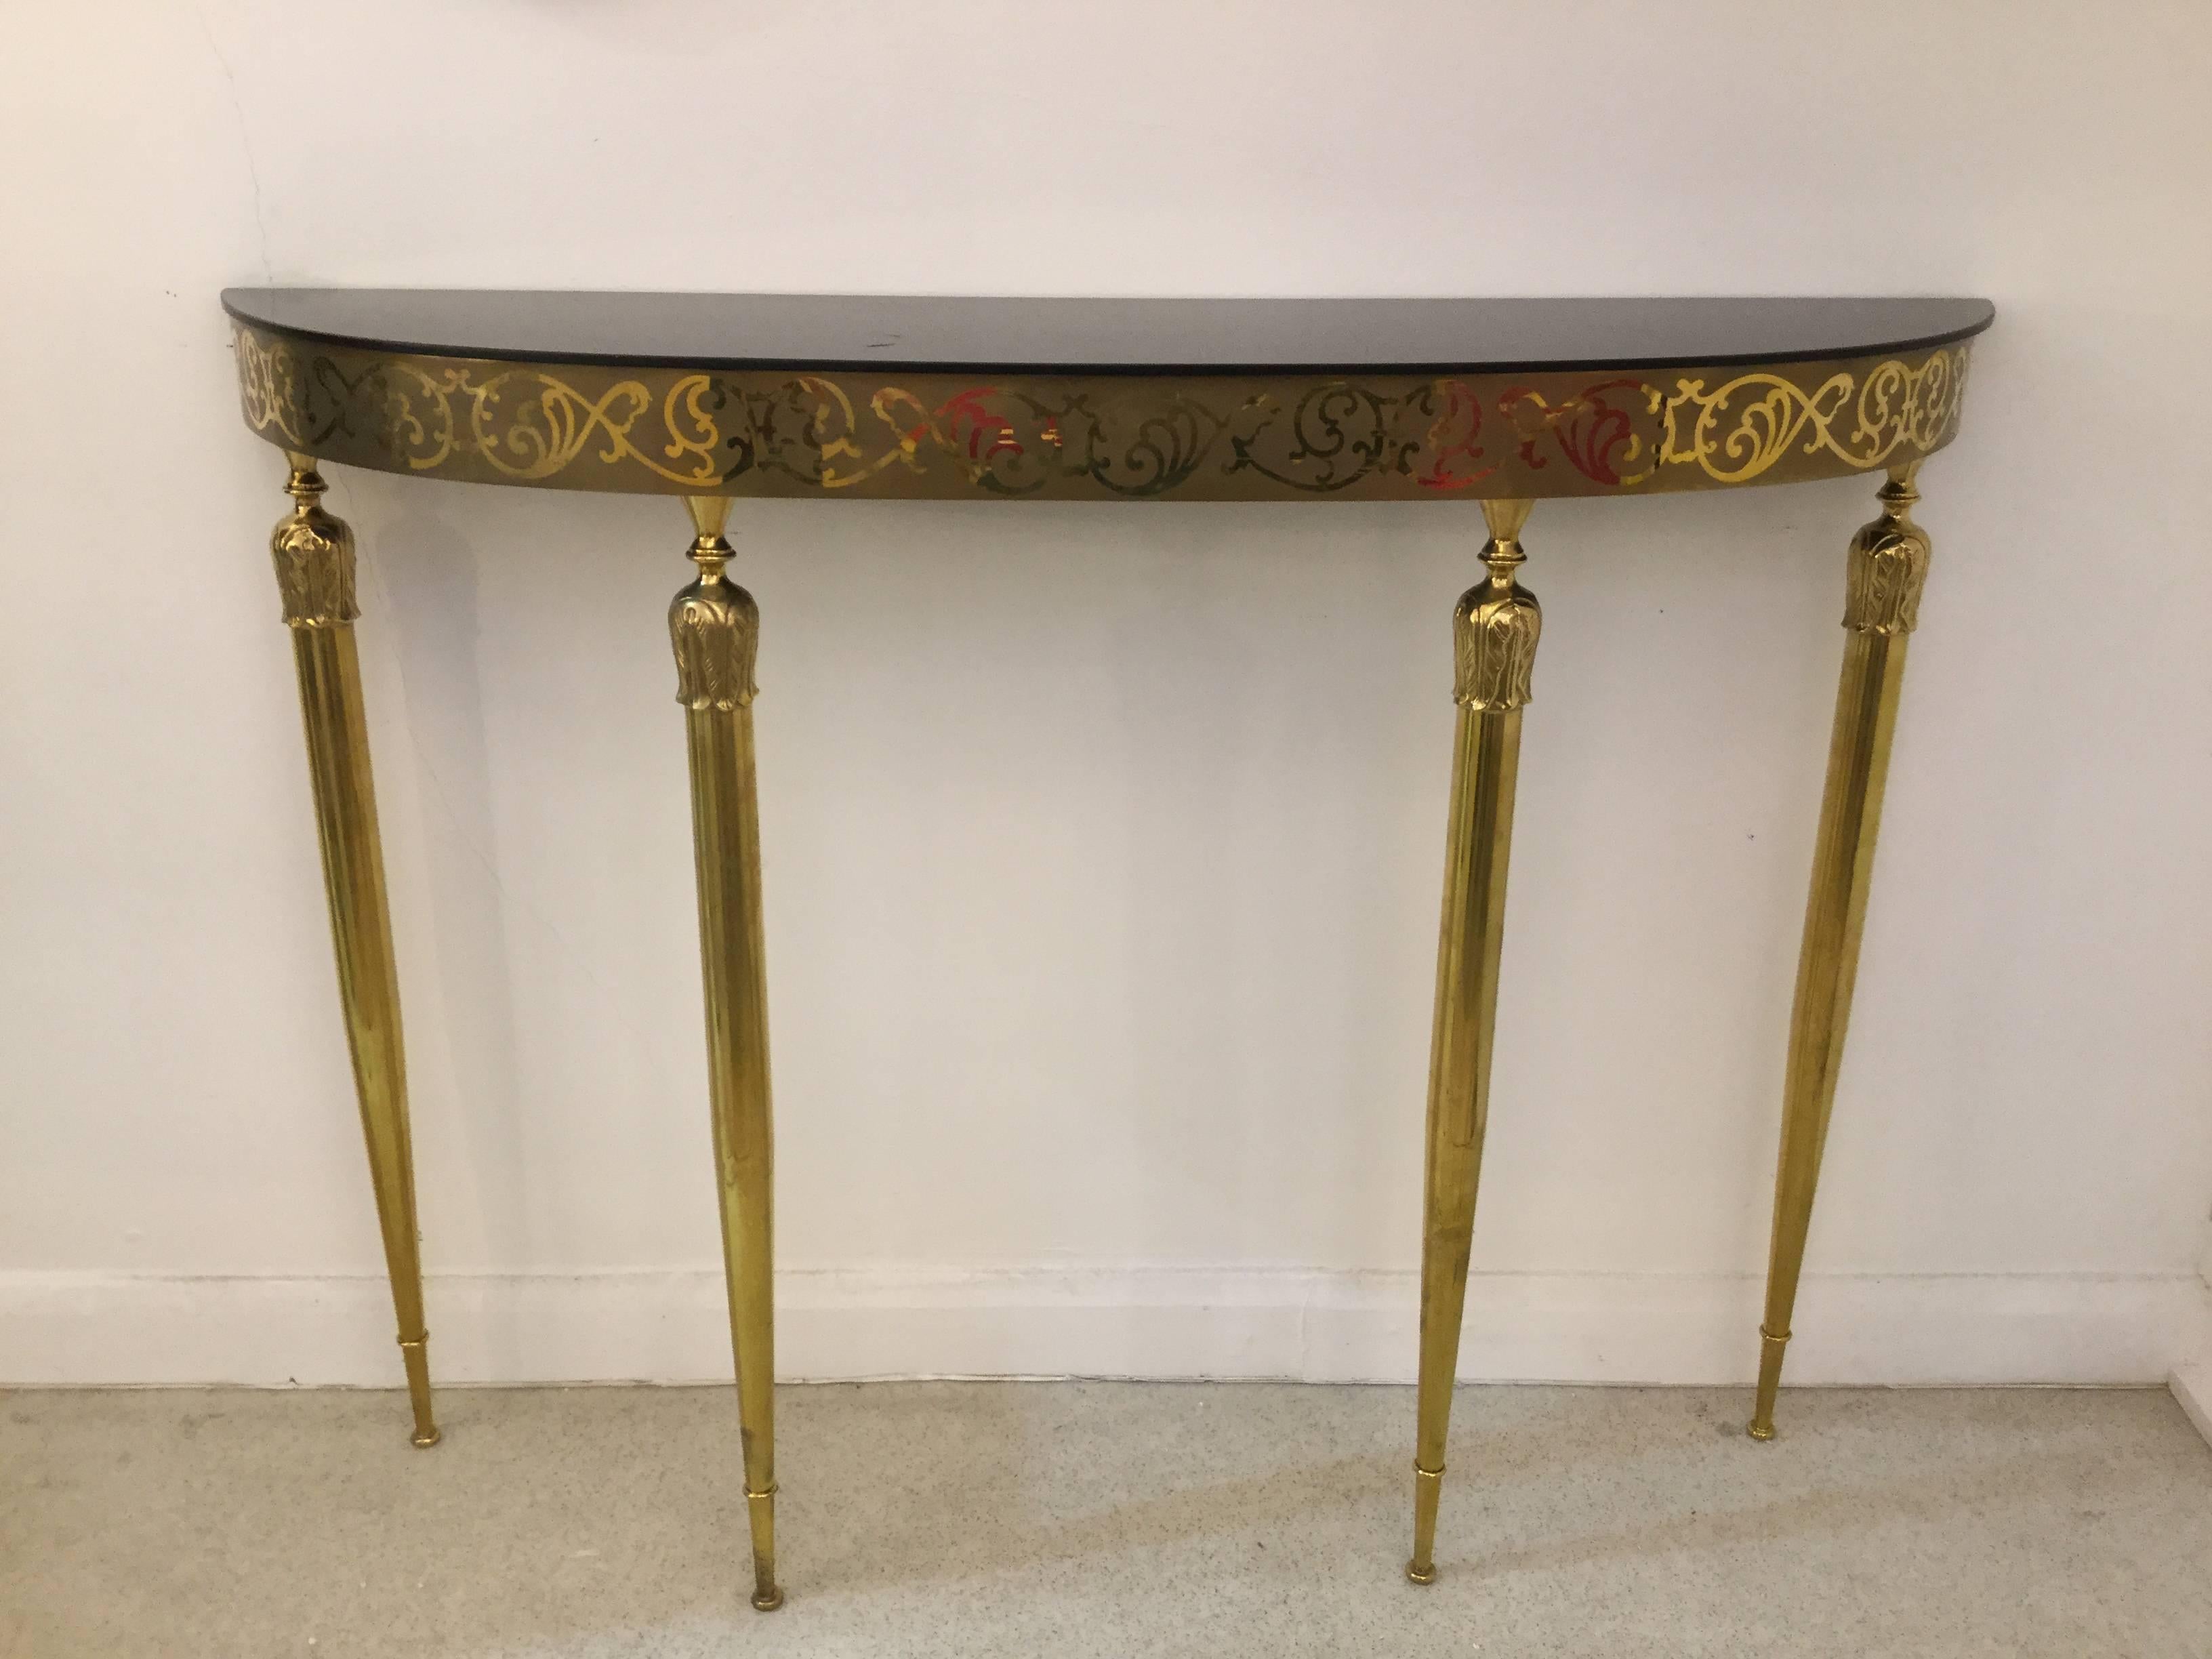 A demilune console table in brass with decorated motifs and black glass top.